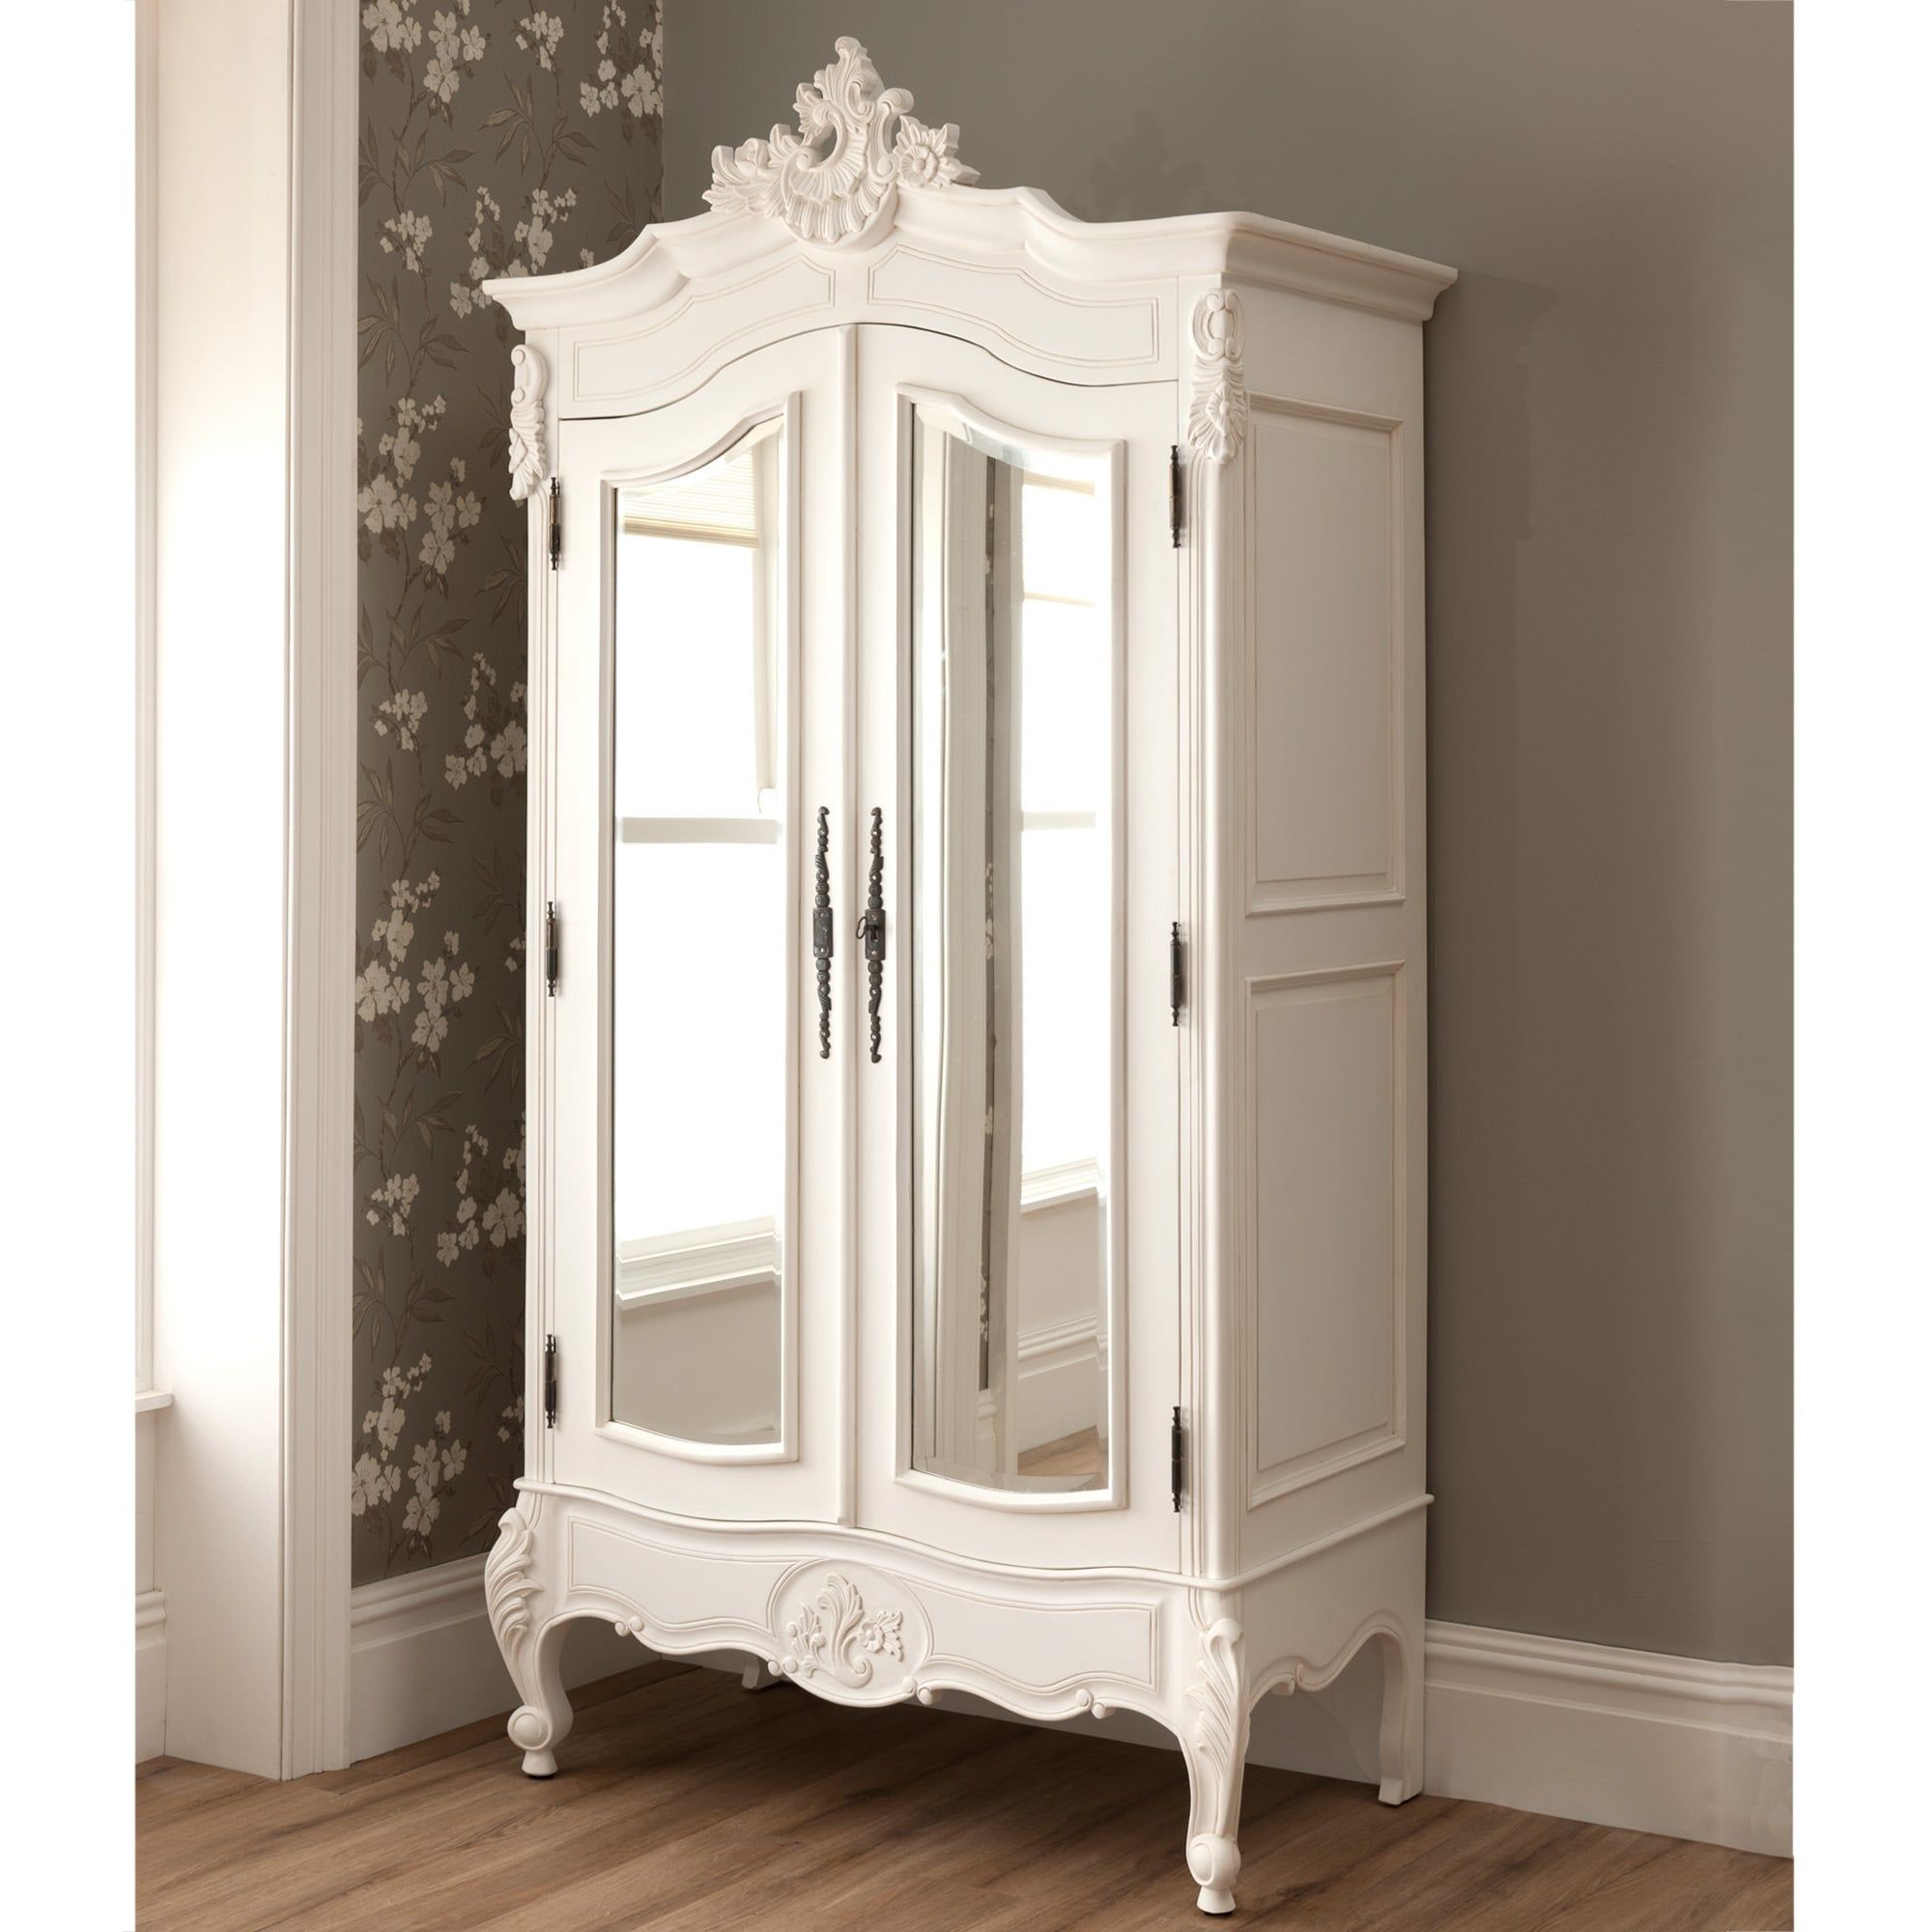 La Rochelle Antique French Mirrored 2 Door Wardrobe Throughout White French Style Wardrobes (View 3 of 15)